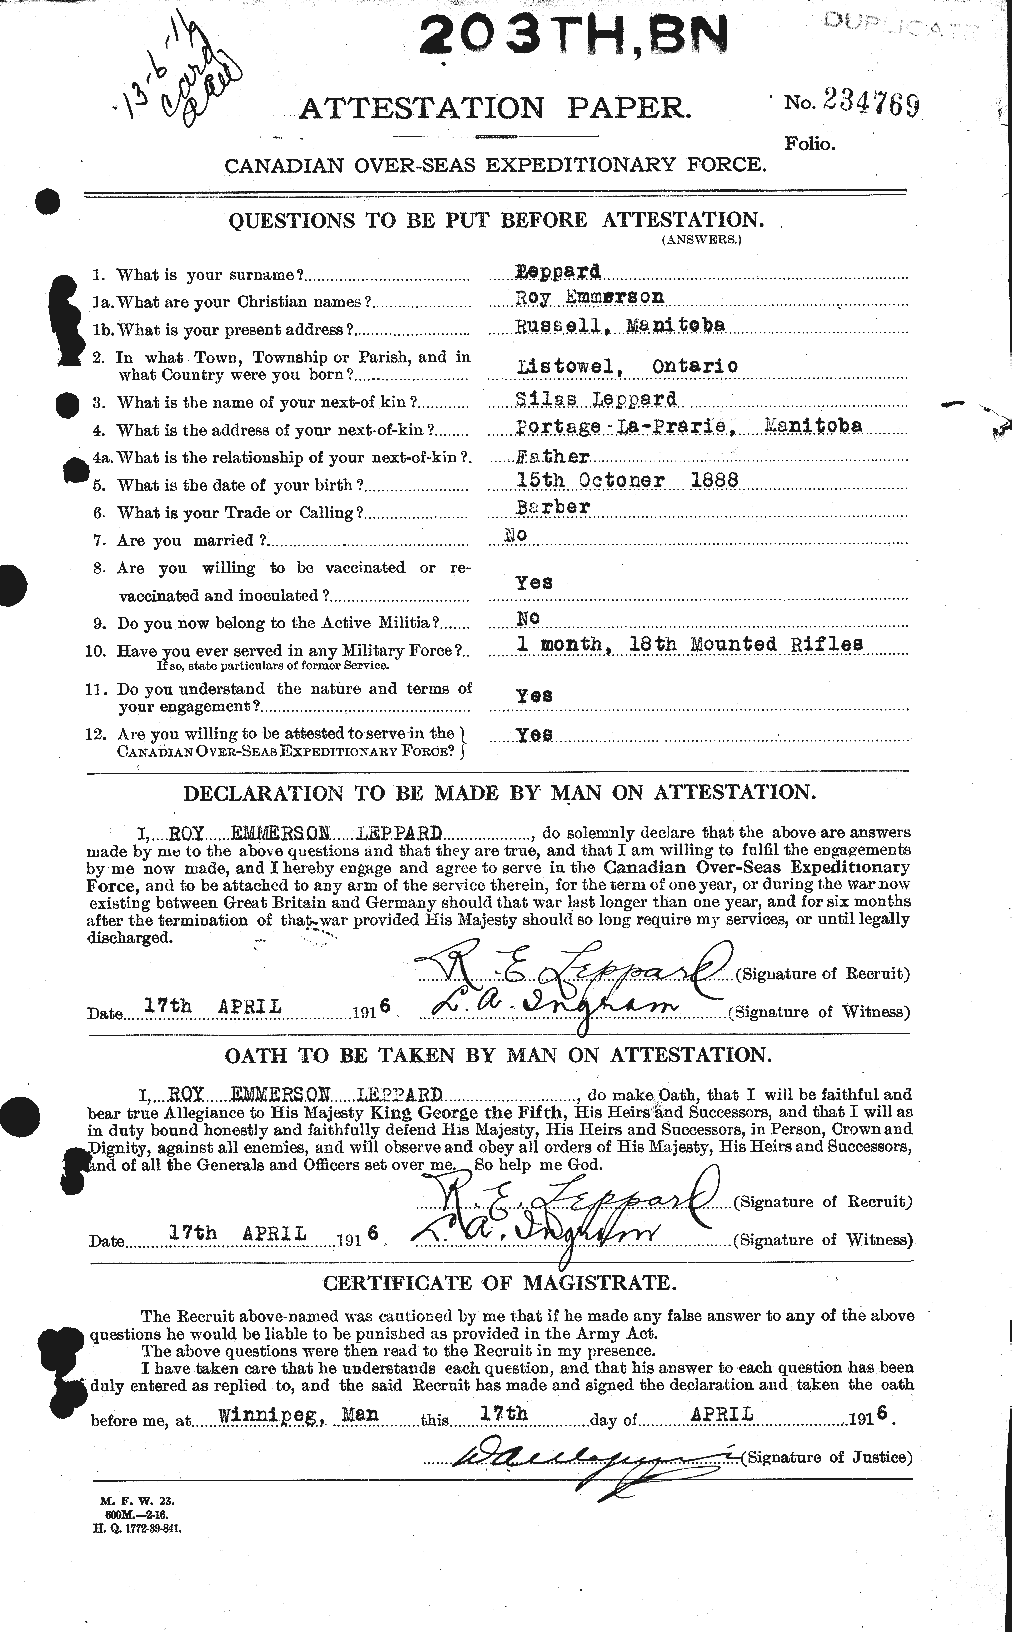 Personnel Records of the First World War - CEF 462987a